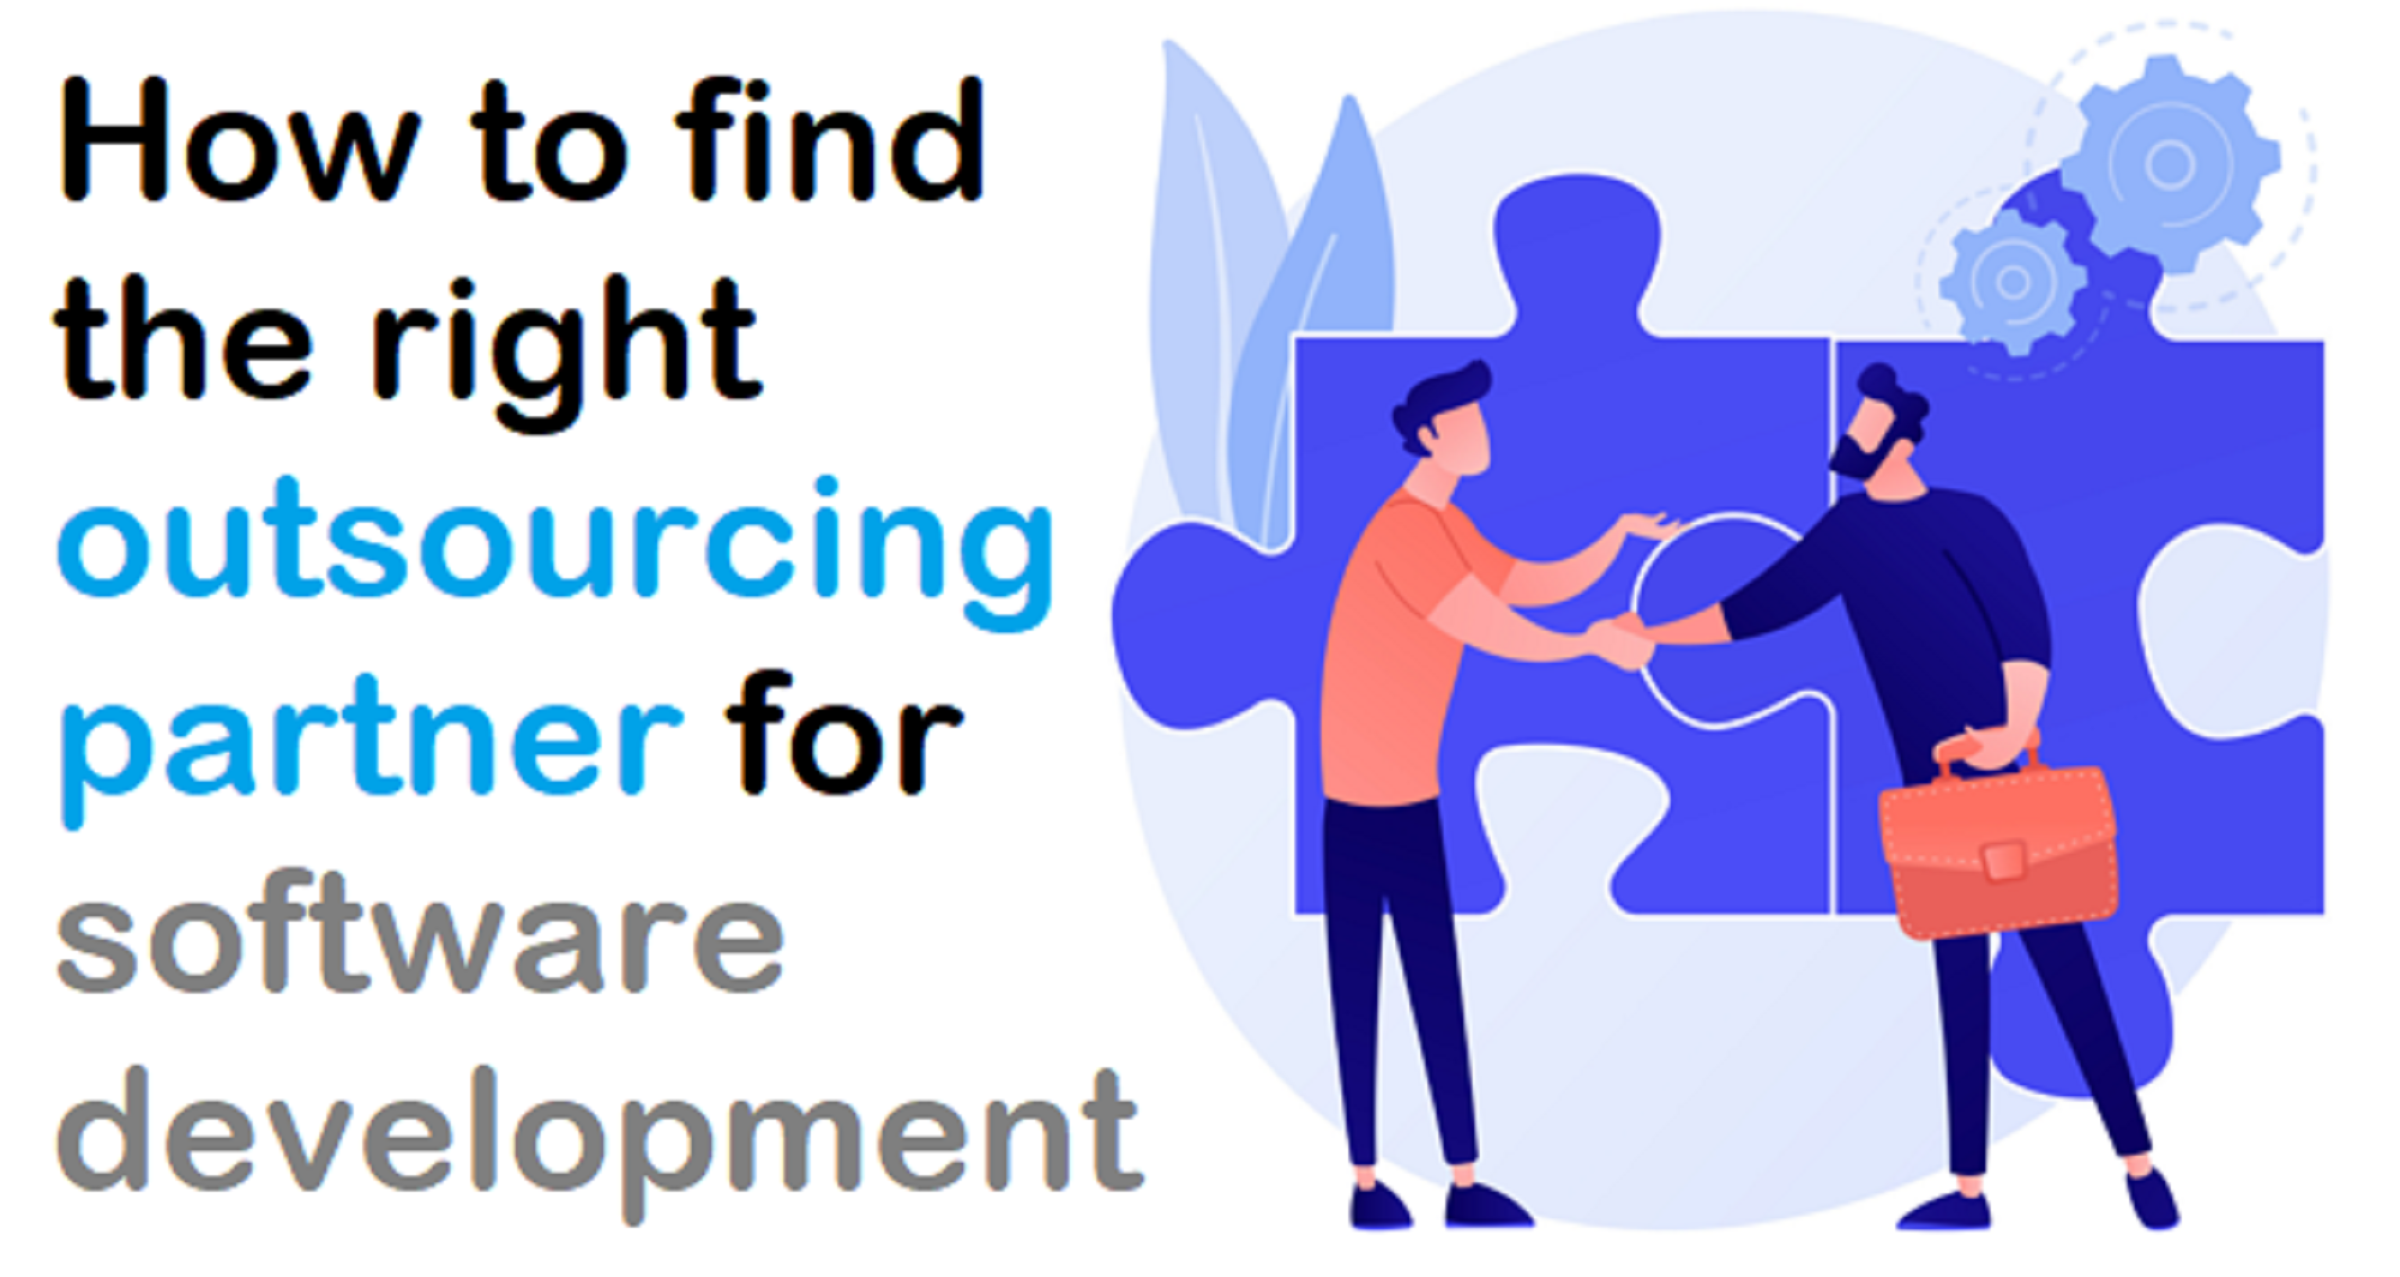 How to find the right outsourcing partner for software development